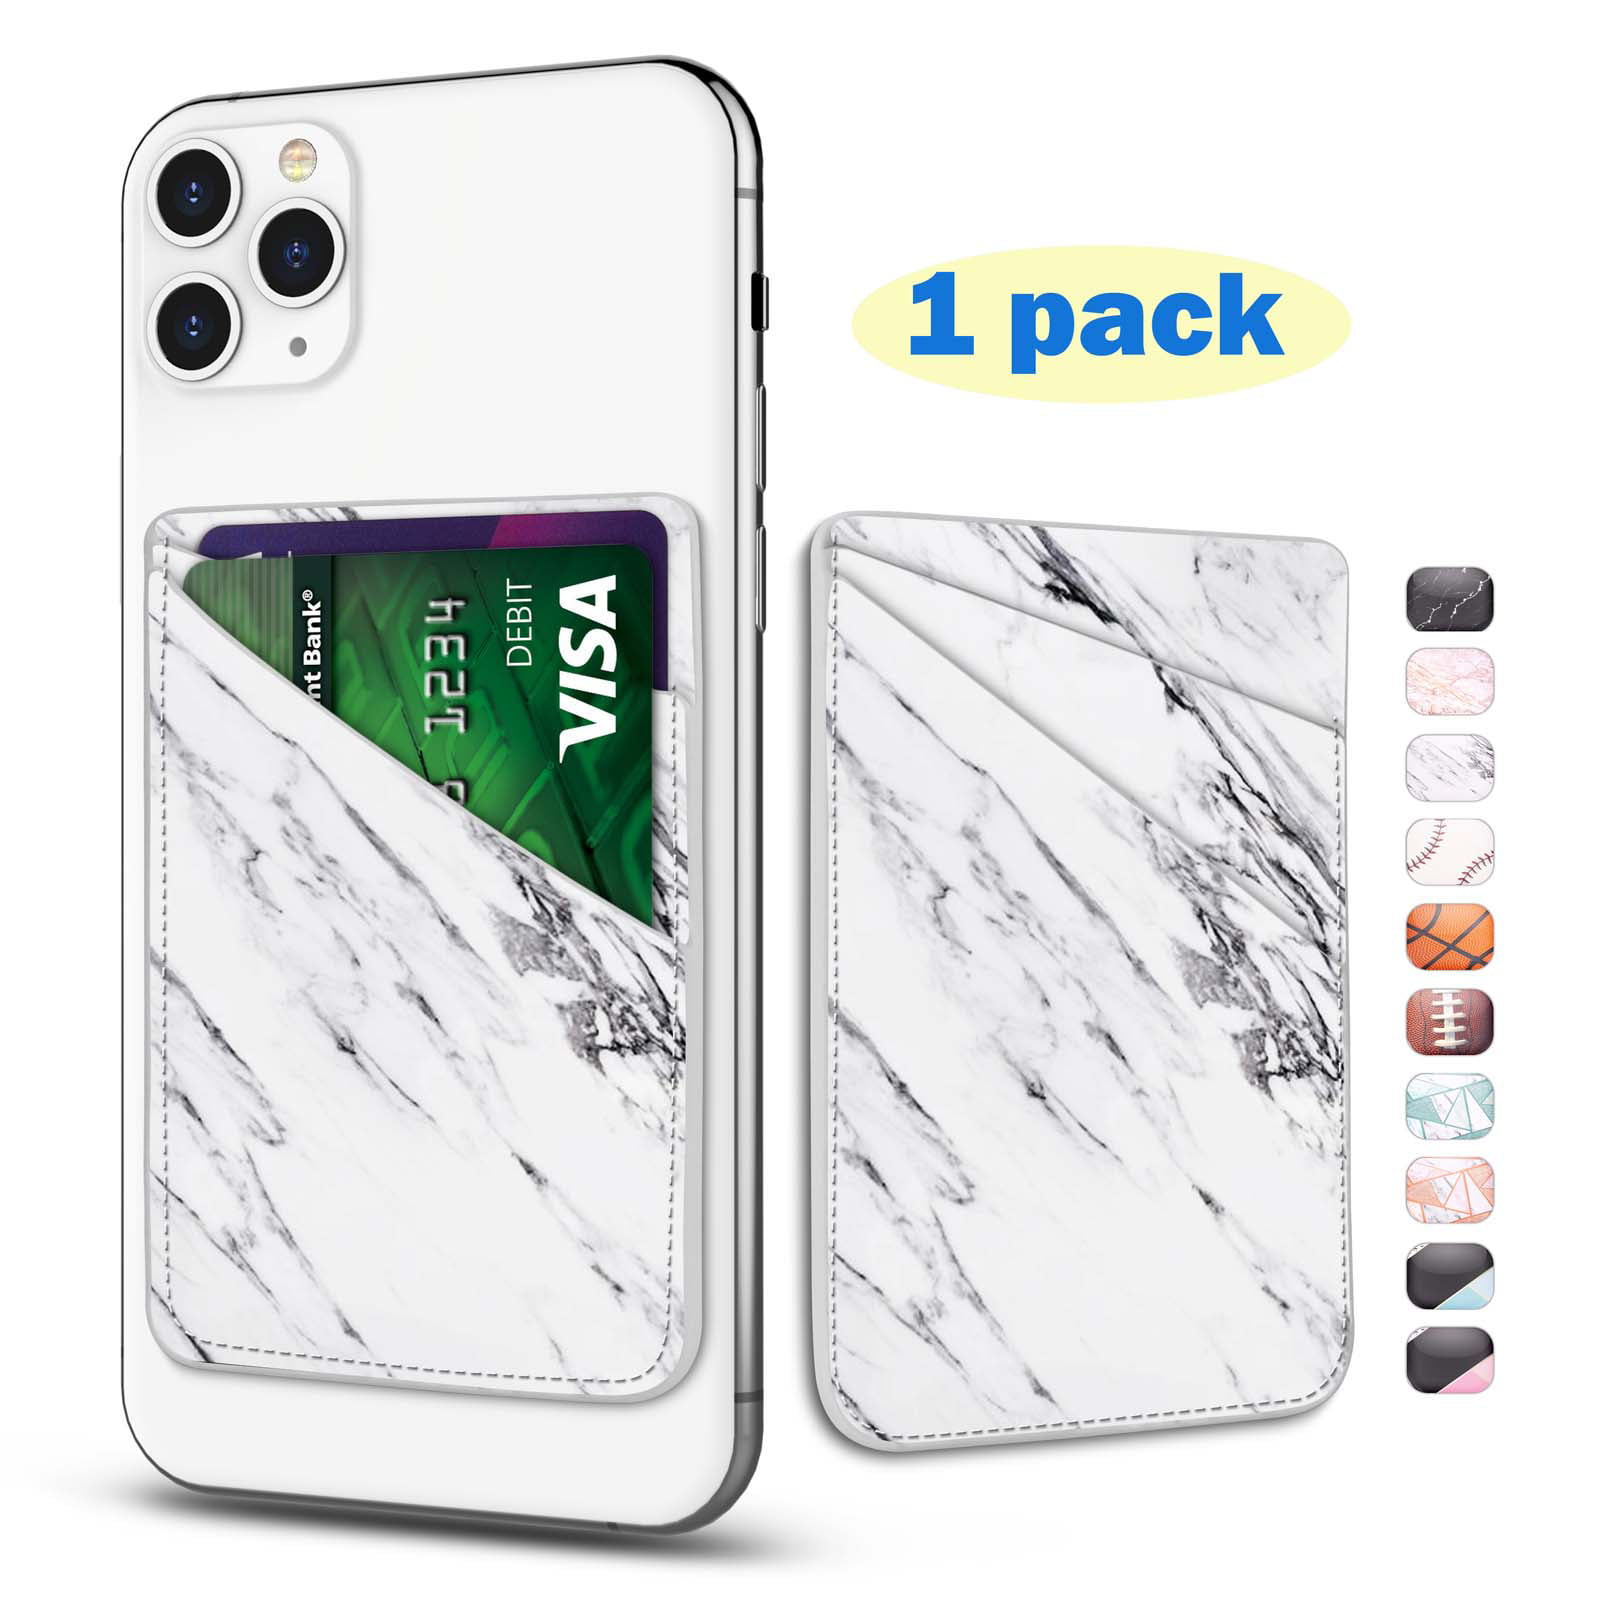 Card Holder for Back of Phone Stick on ID Cards Wallet PU Leather Sleeve Adhesive 3M Sticker Pouch for Samsung Galaxy iPhone and More Smartphones Leopard Skin